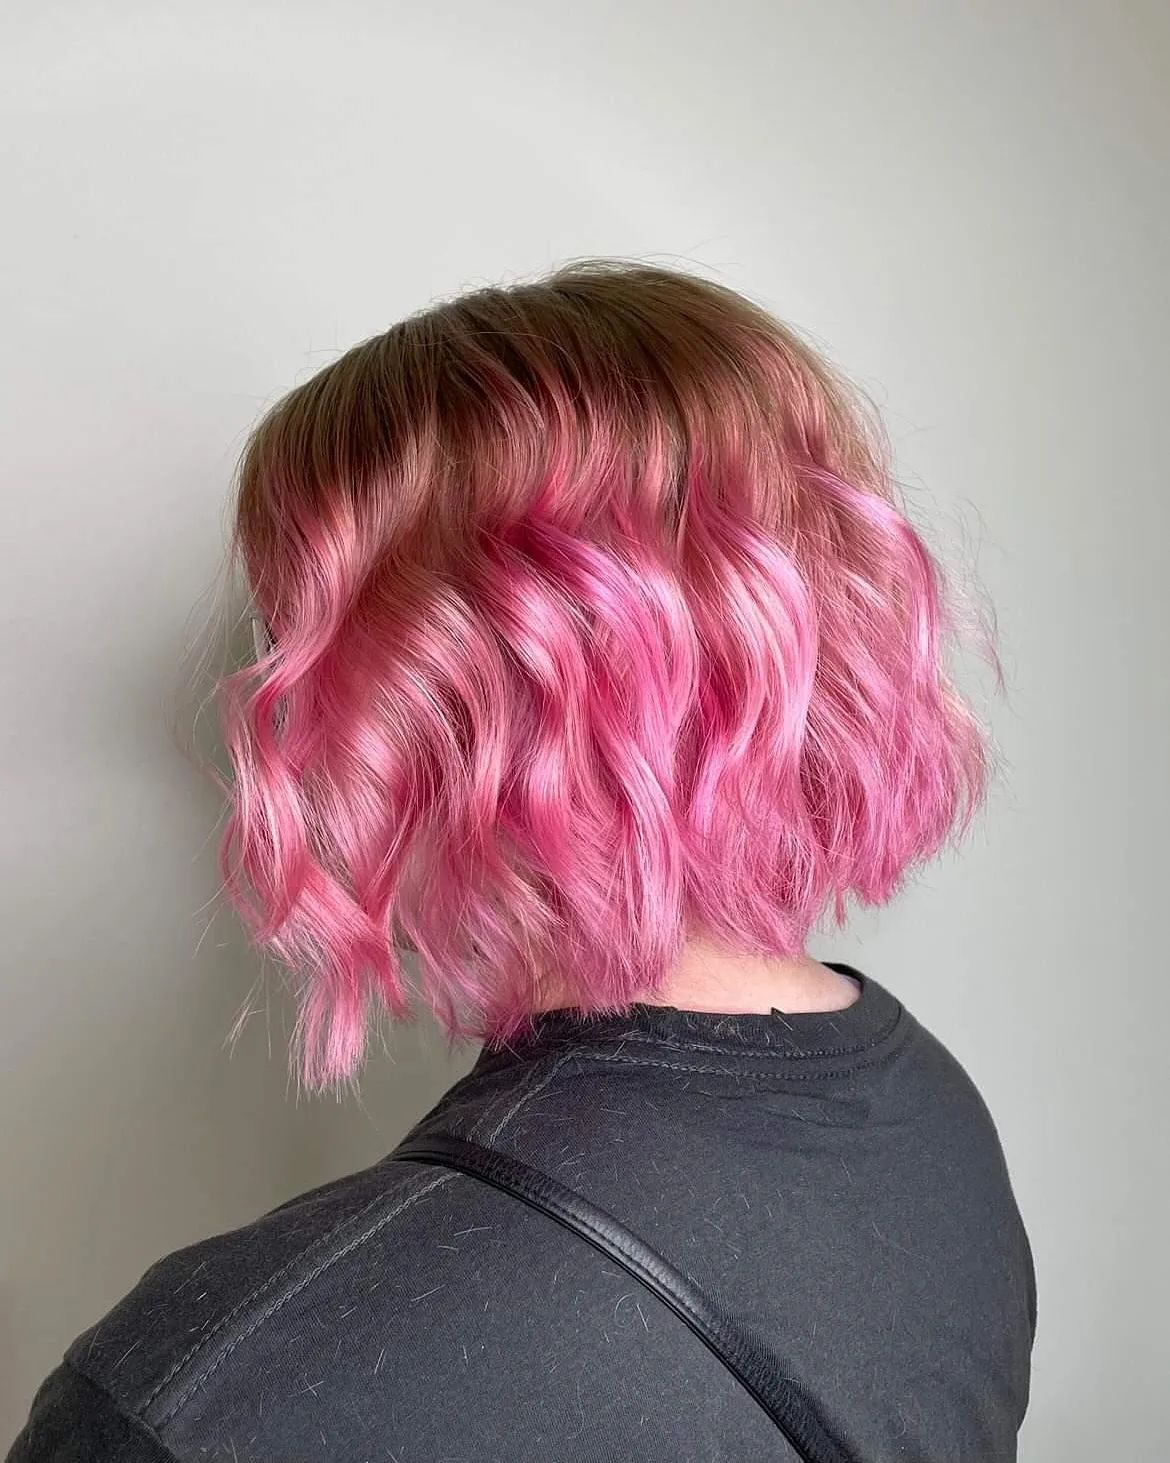 pink ombre hair color 44 Ombre pink hair blonde | Pastel pink ombre hair | Pink balayage Hair Pink Ombre Hair Color for Women